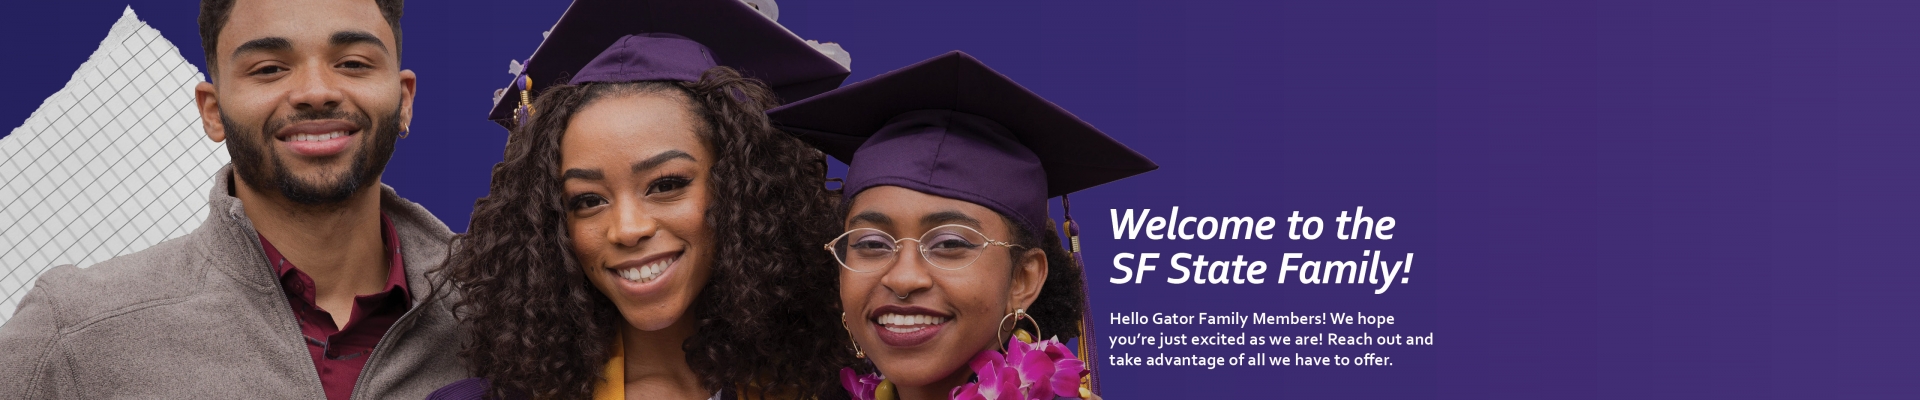 Welcome to the SF State Family! Hello Gator Family Members! We hope you are just as excited as we are! Reach out and take advantage of all we have to offer.